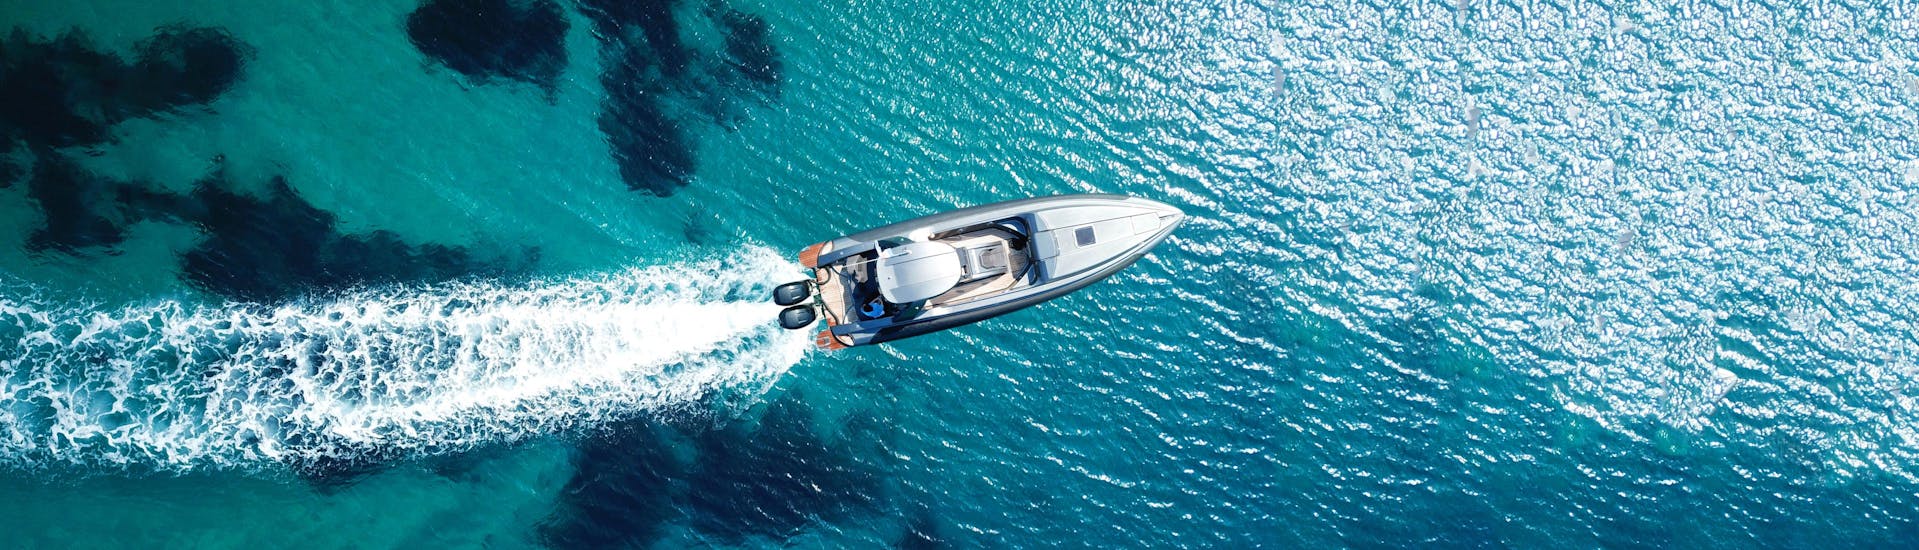 People enjoy a RIB Boat bouncing over the sea in transparent water after taking advantage of a RIB boat rental